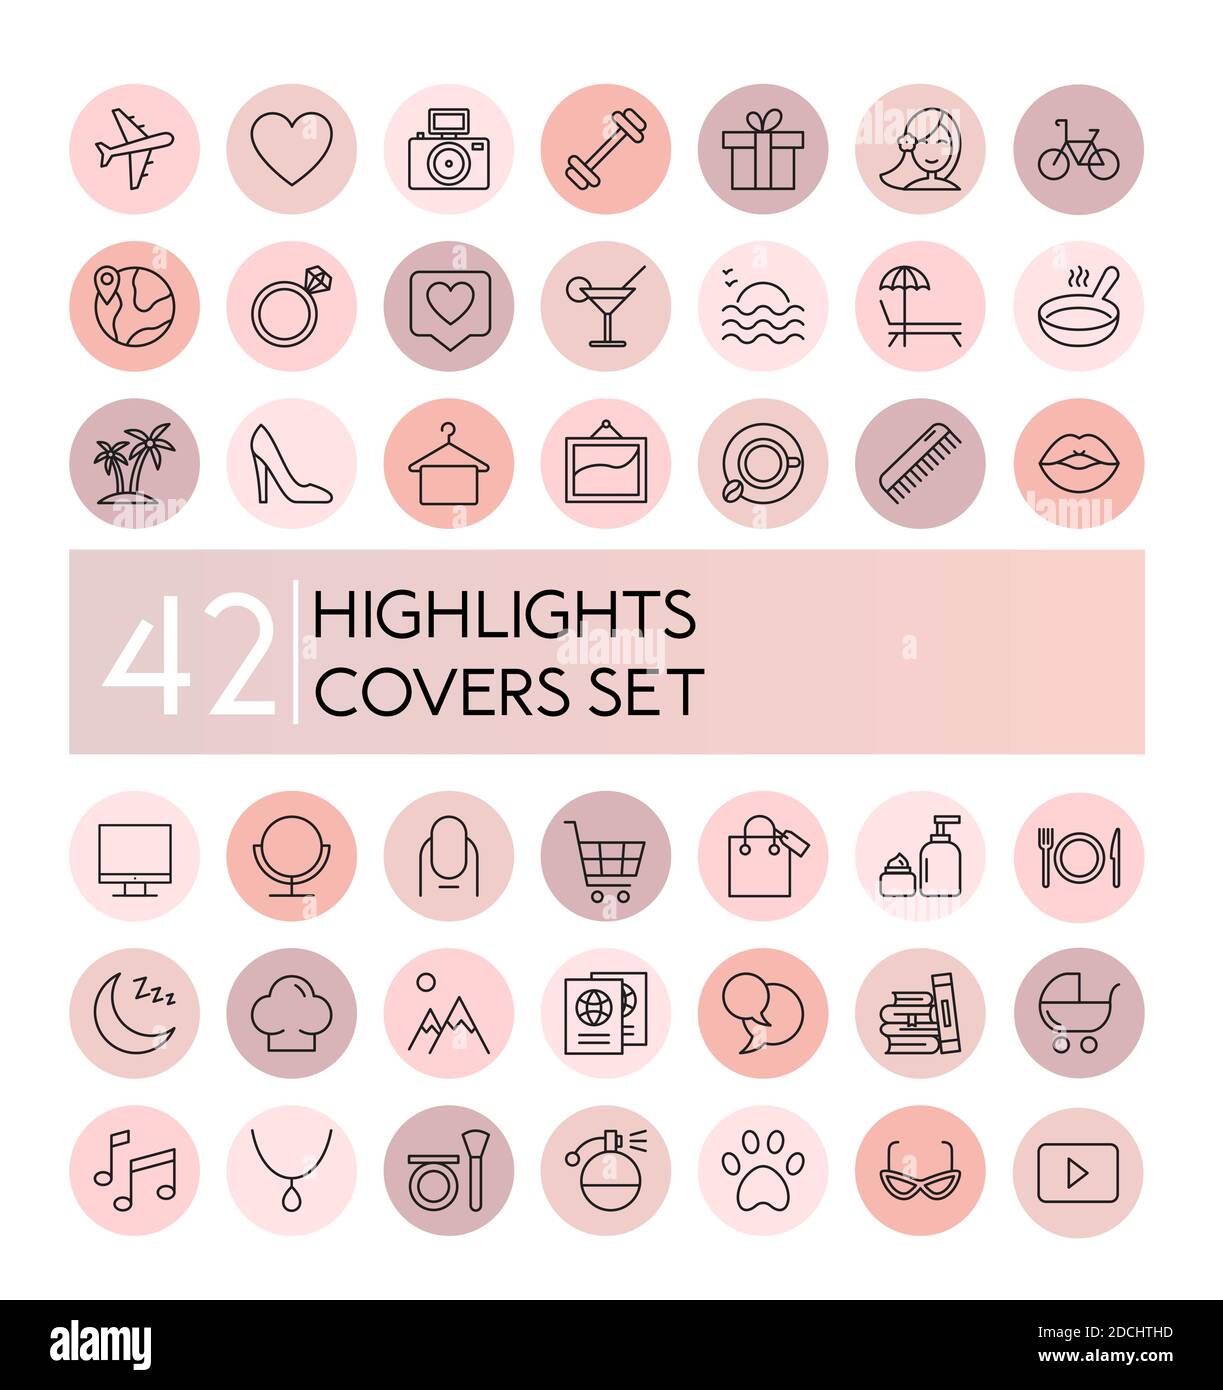 highlight vector illustration icons set. Social media collection of pink  flat line covers for female account, blogger stories, lifestyle fashion  Stock Vector Image & Art - Alamy